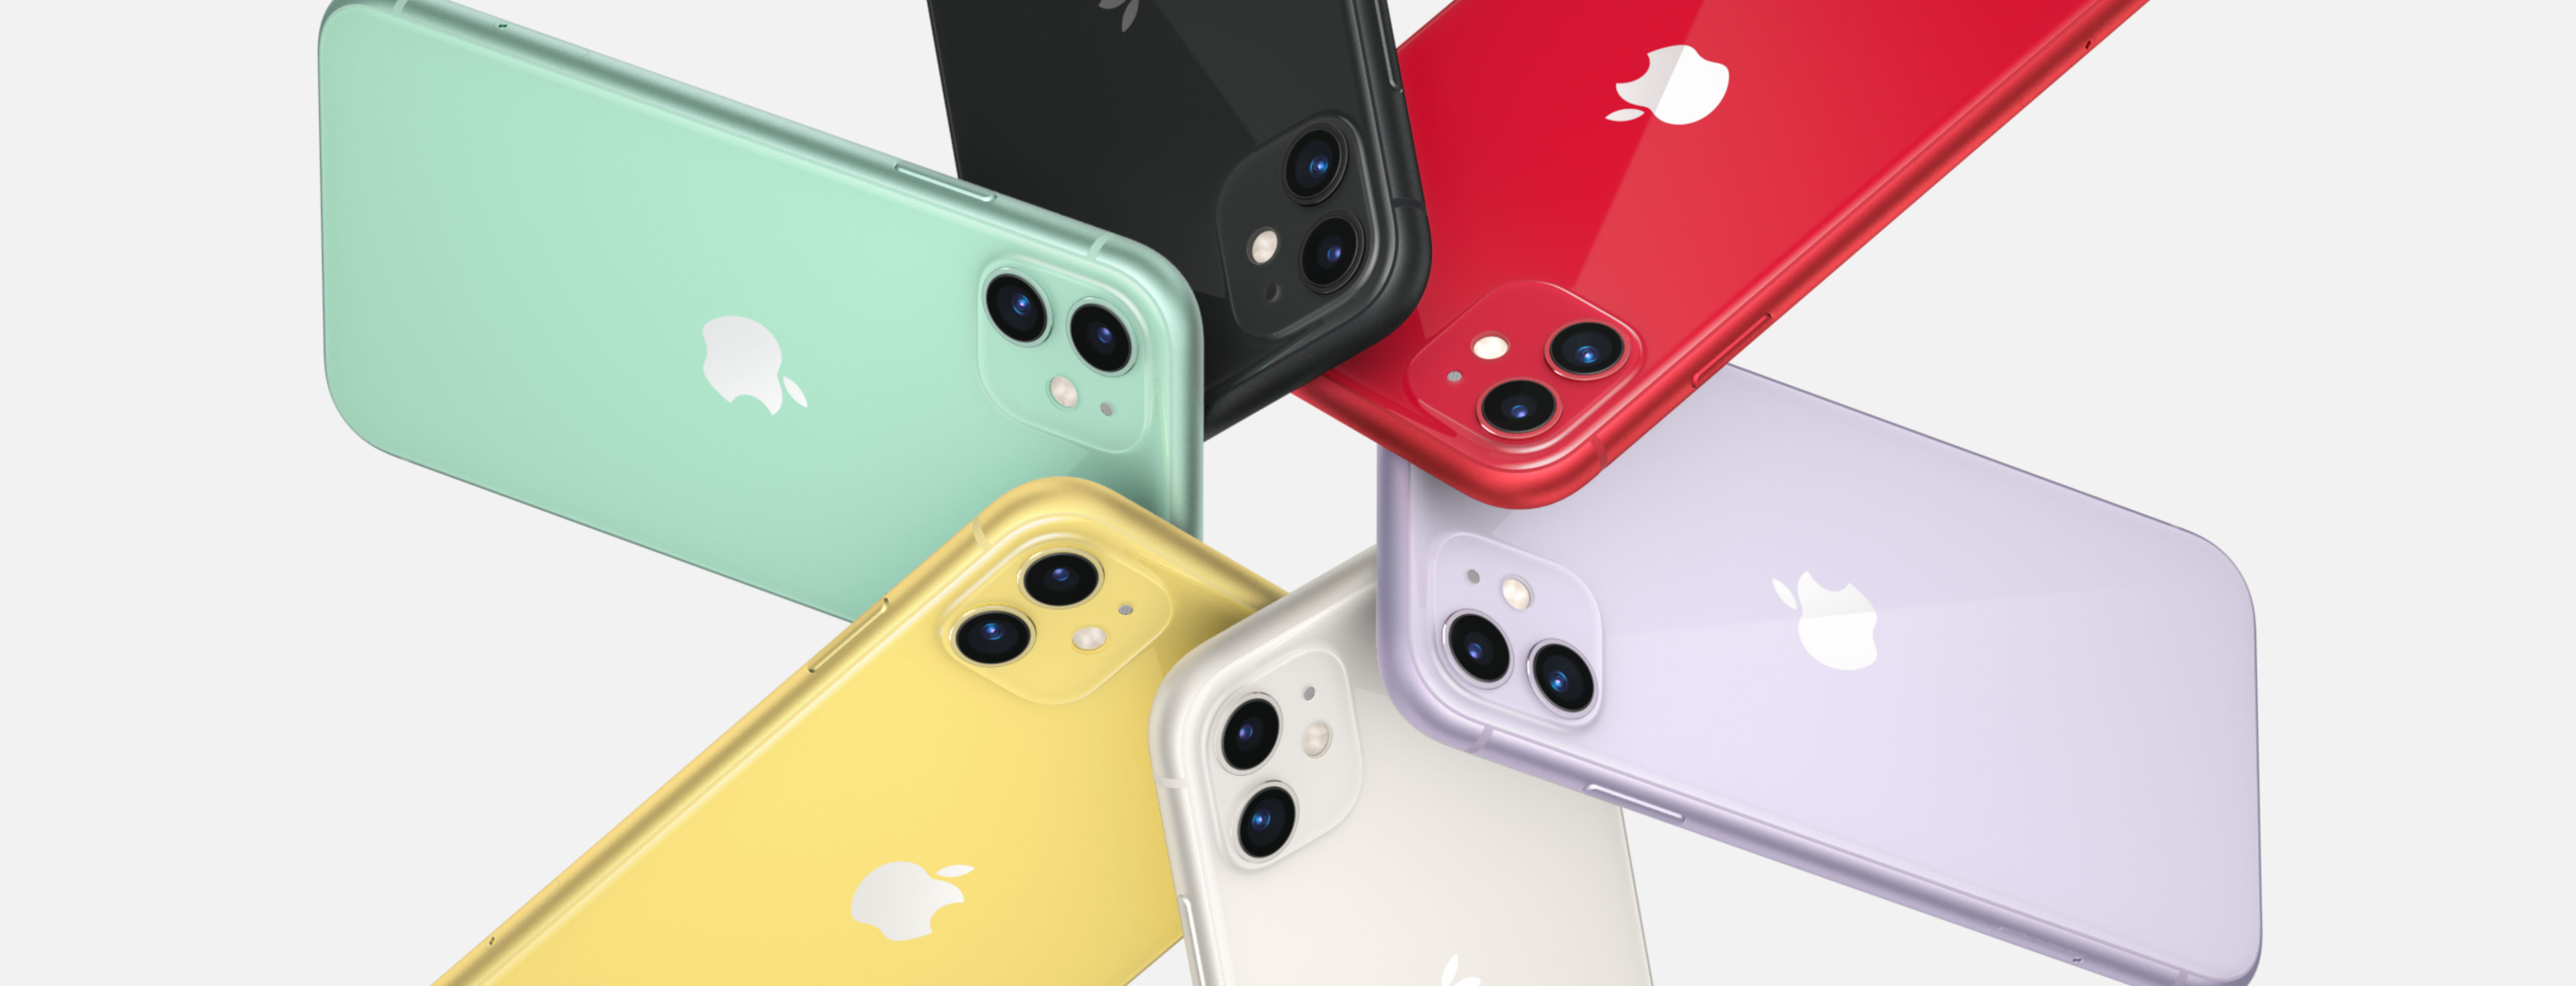 The Best Clear Cases For Iphone 11 And Iphone 11 Pro